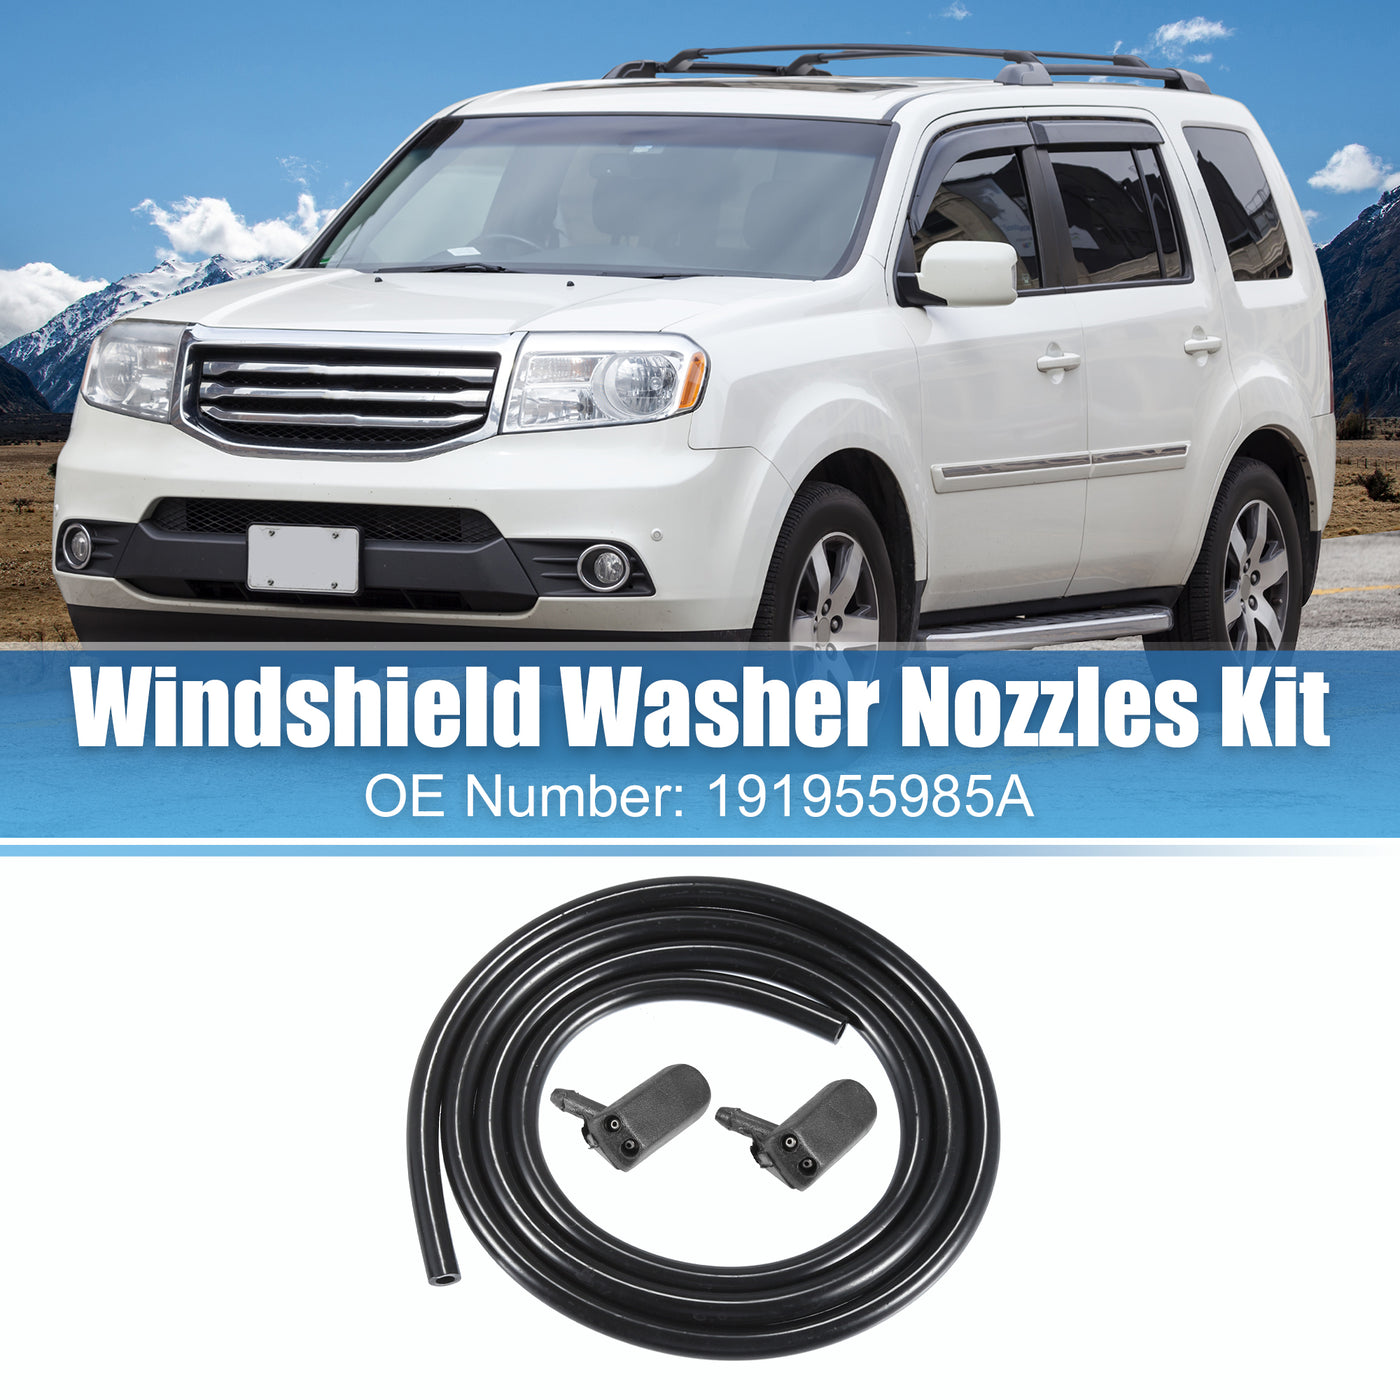 uxcell Uxcell 1 Set Windshield Wiper Washer Nozzle Spray Jet with 1m Windshield Washer Hose for Volkswagen Passat 1.9L 1996-1997 No.191955985A